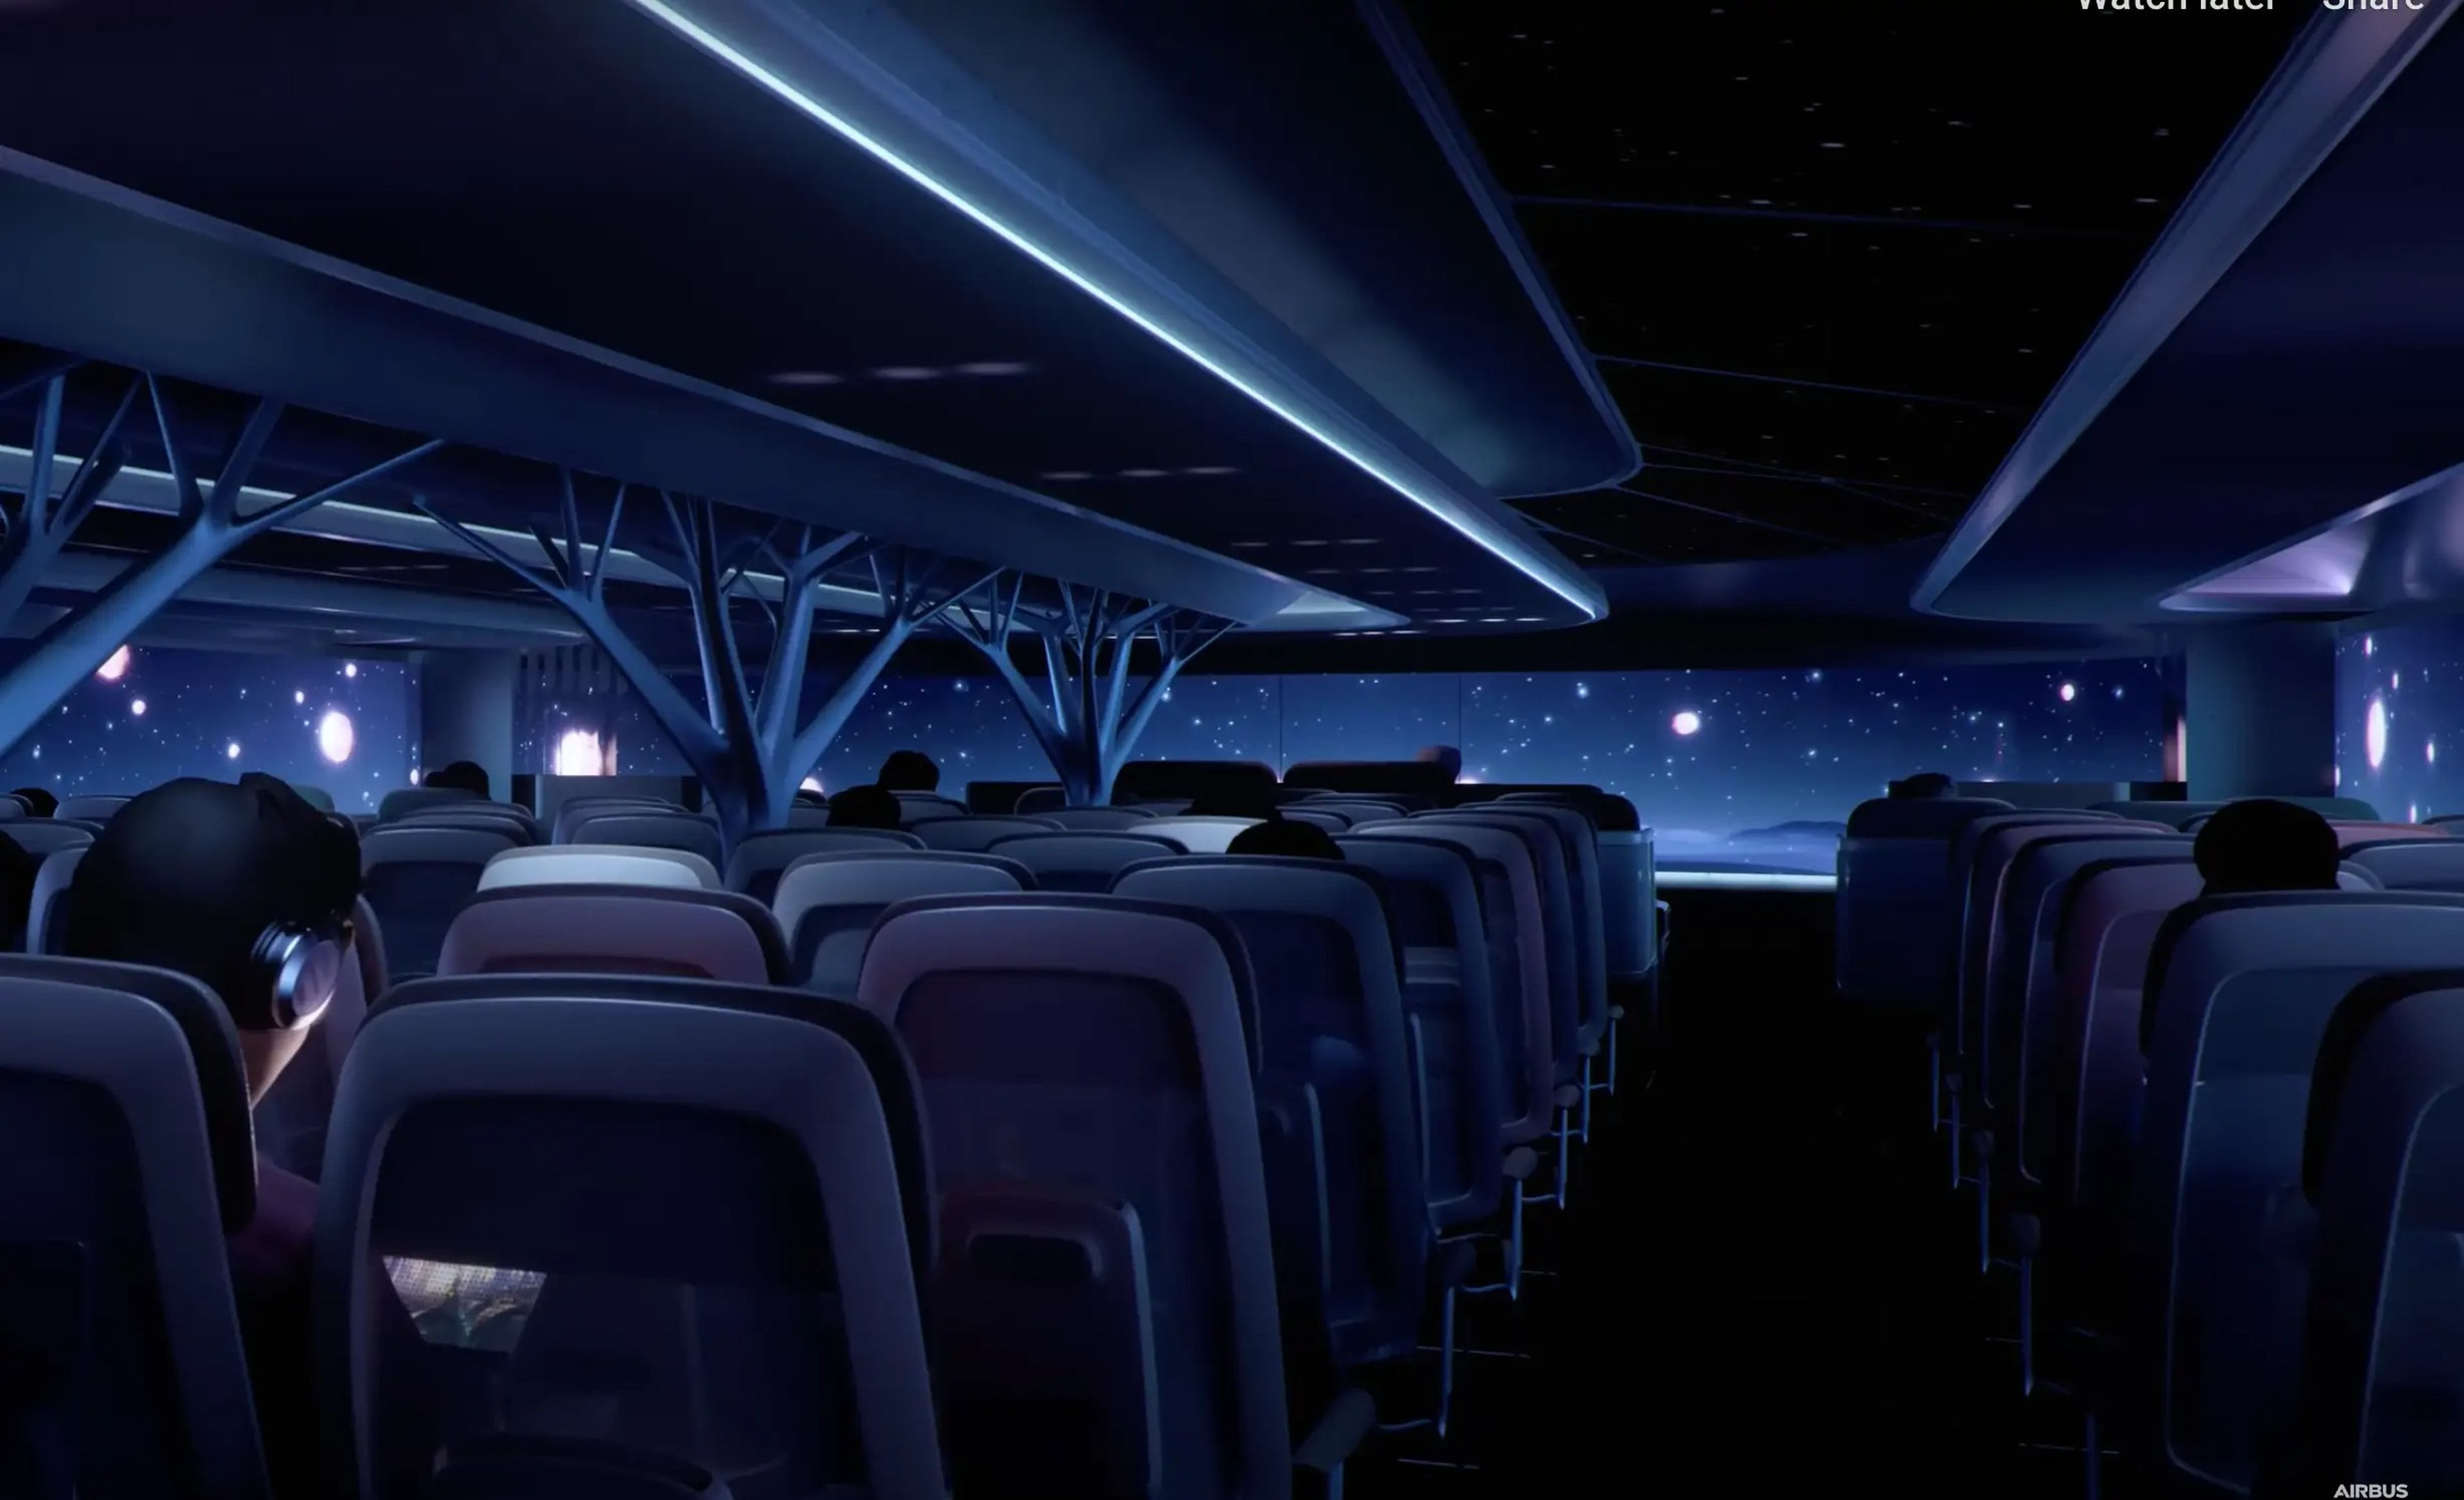 Airbus' Airspace Cabin Vision 2035+ rendering of an aircraft cabin in the dark.